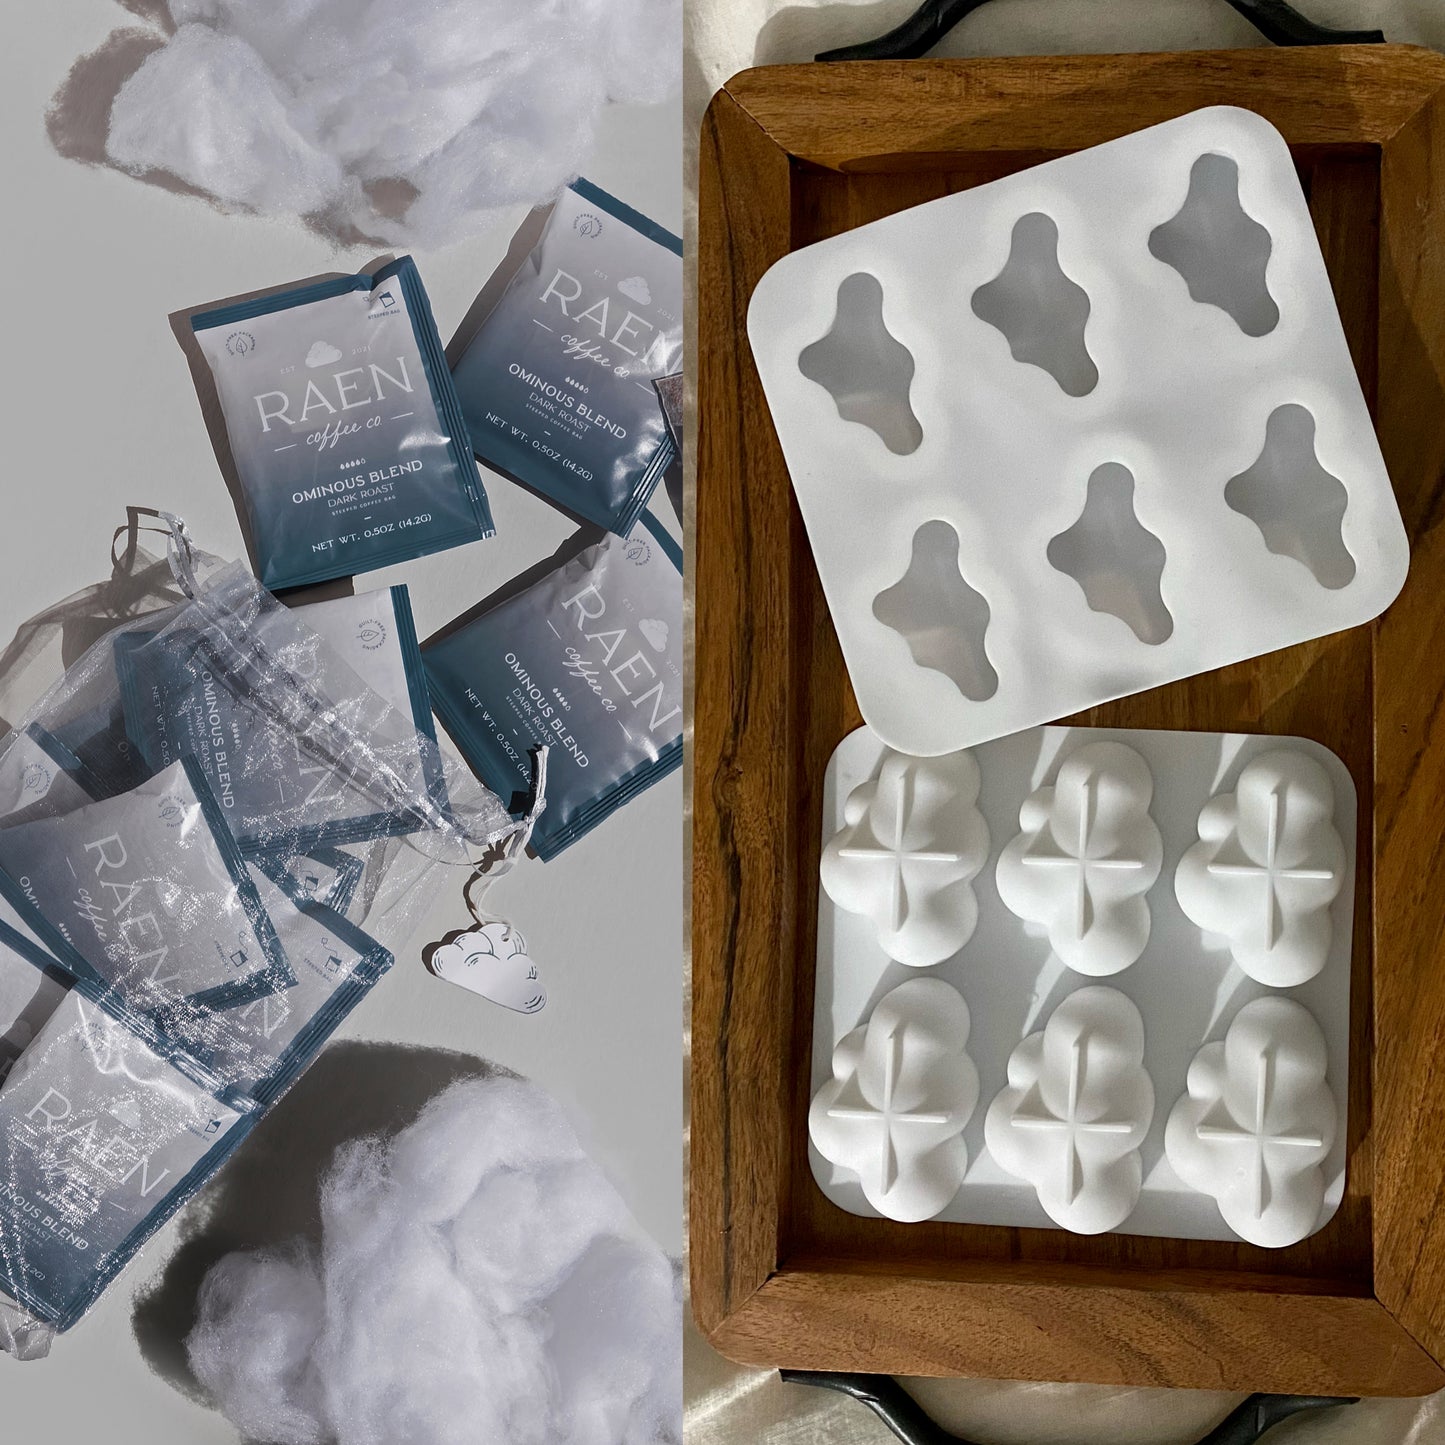 15 Count Ominous Blend & Cloud Ice Tray